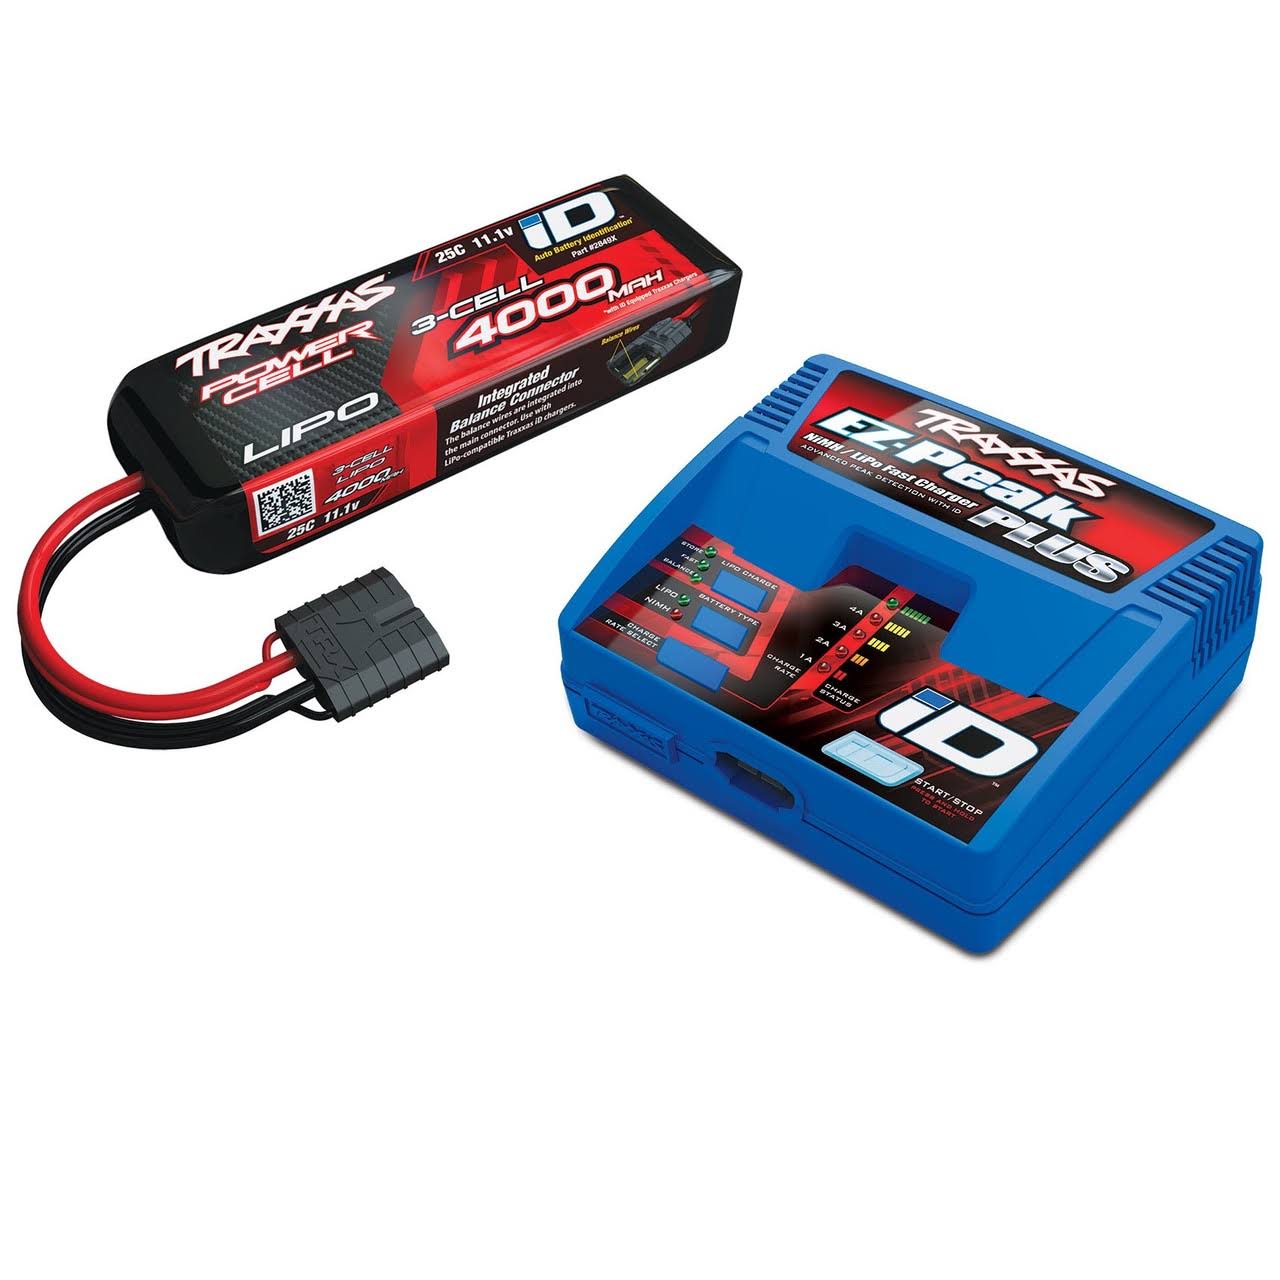 Traxxas 2994 - 3S 4000mAh Battery / ID Charger Completer Pack